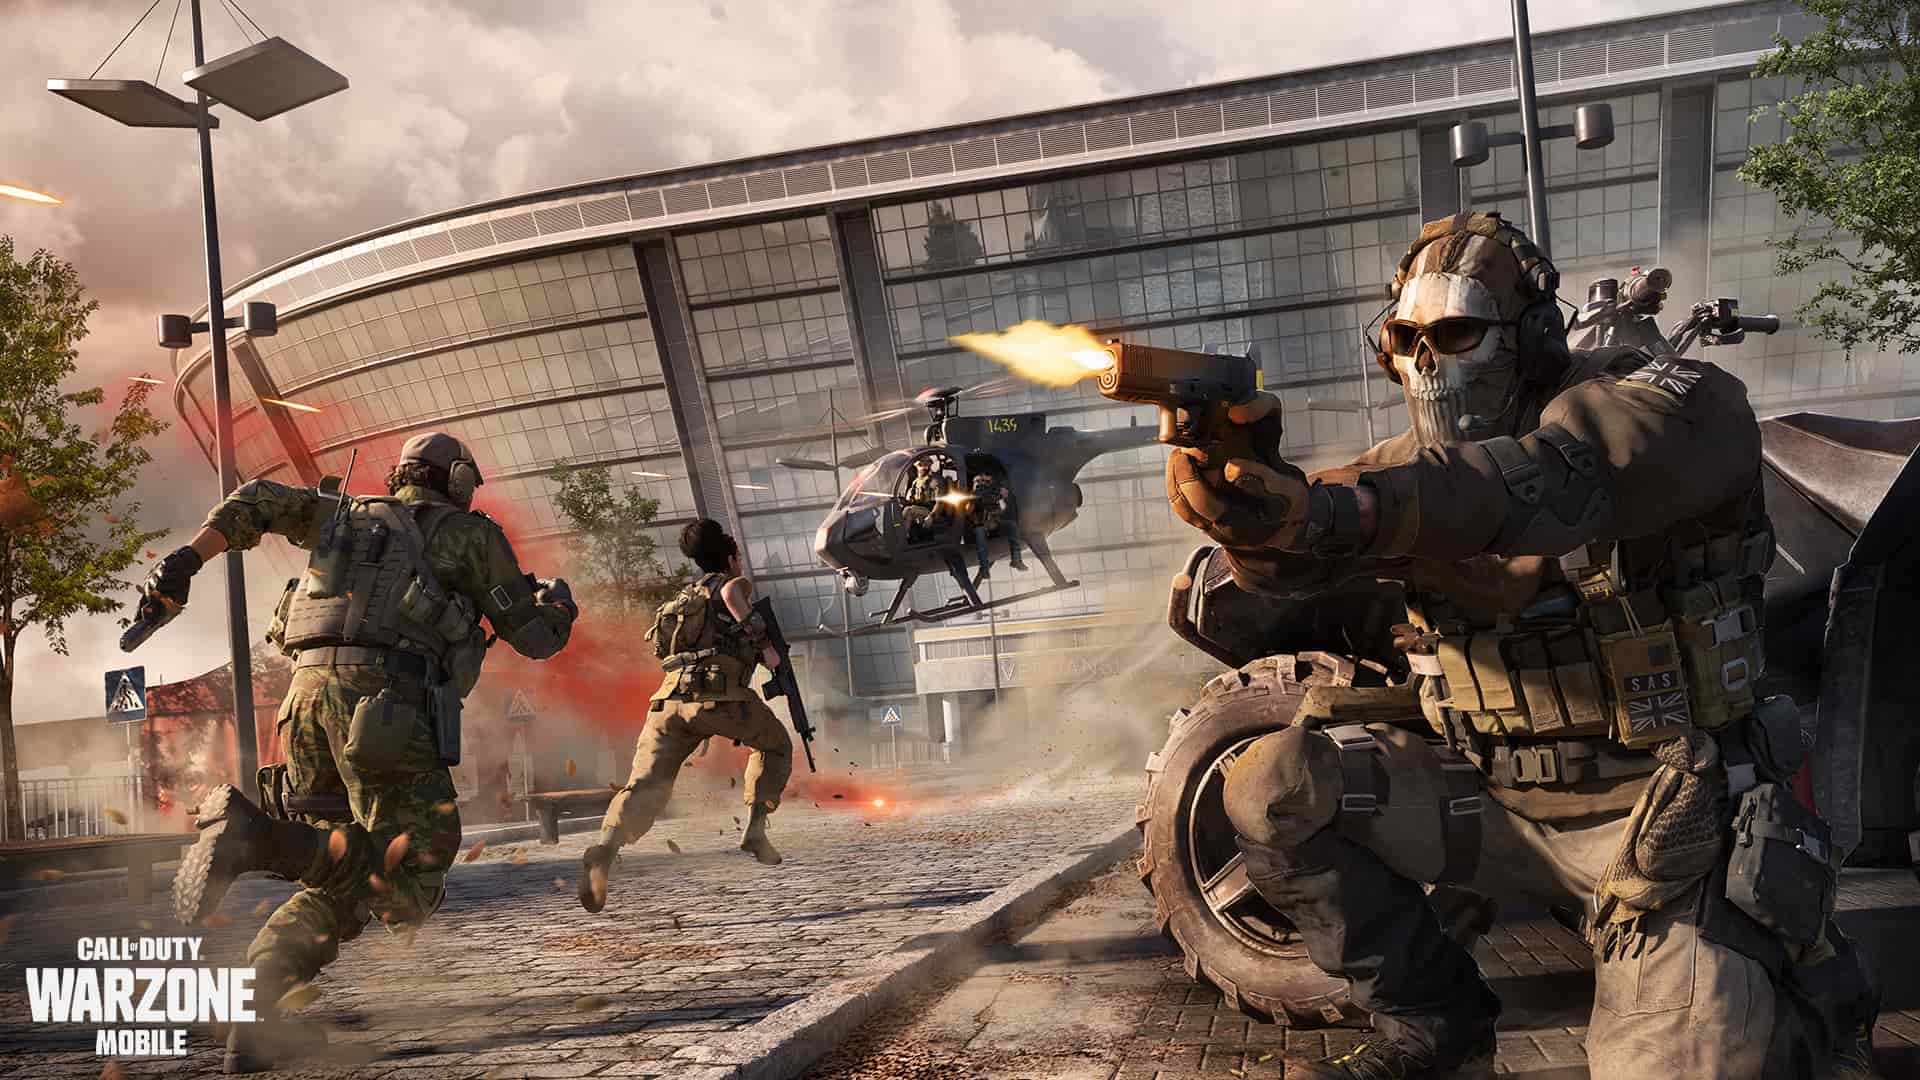 Call of Duty Warzone Mobile Features Call of Duty Warzone Mobile Pre Registration Has Started, Know How To Get Early Access